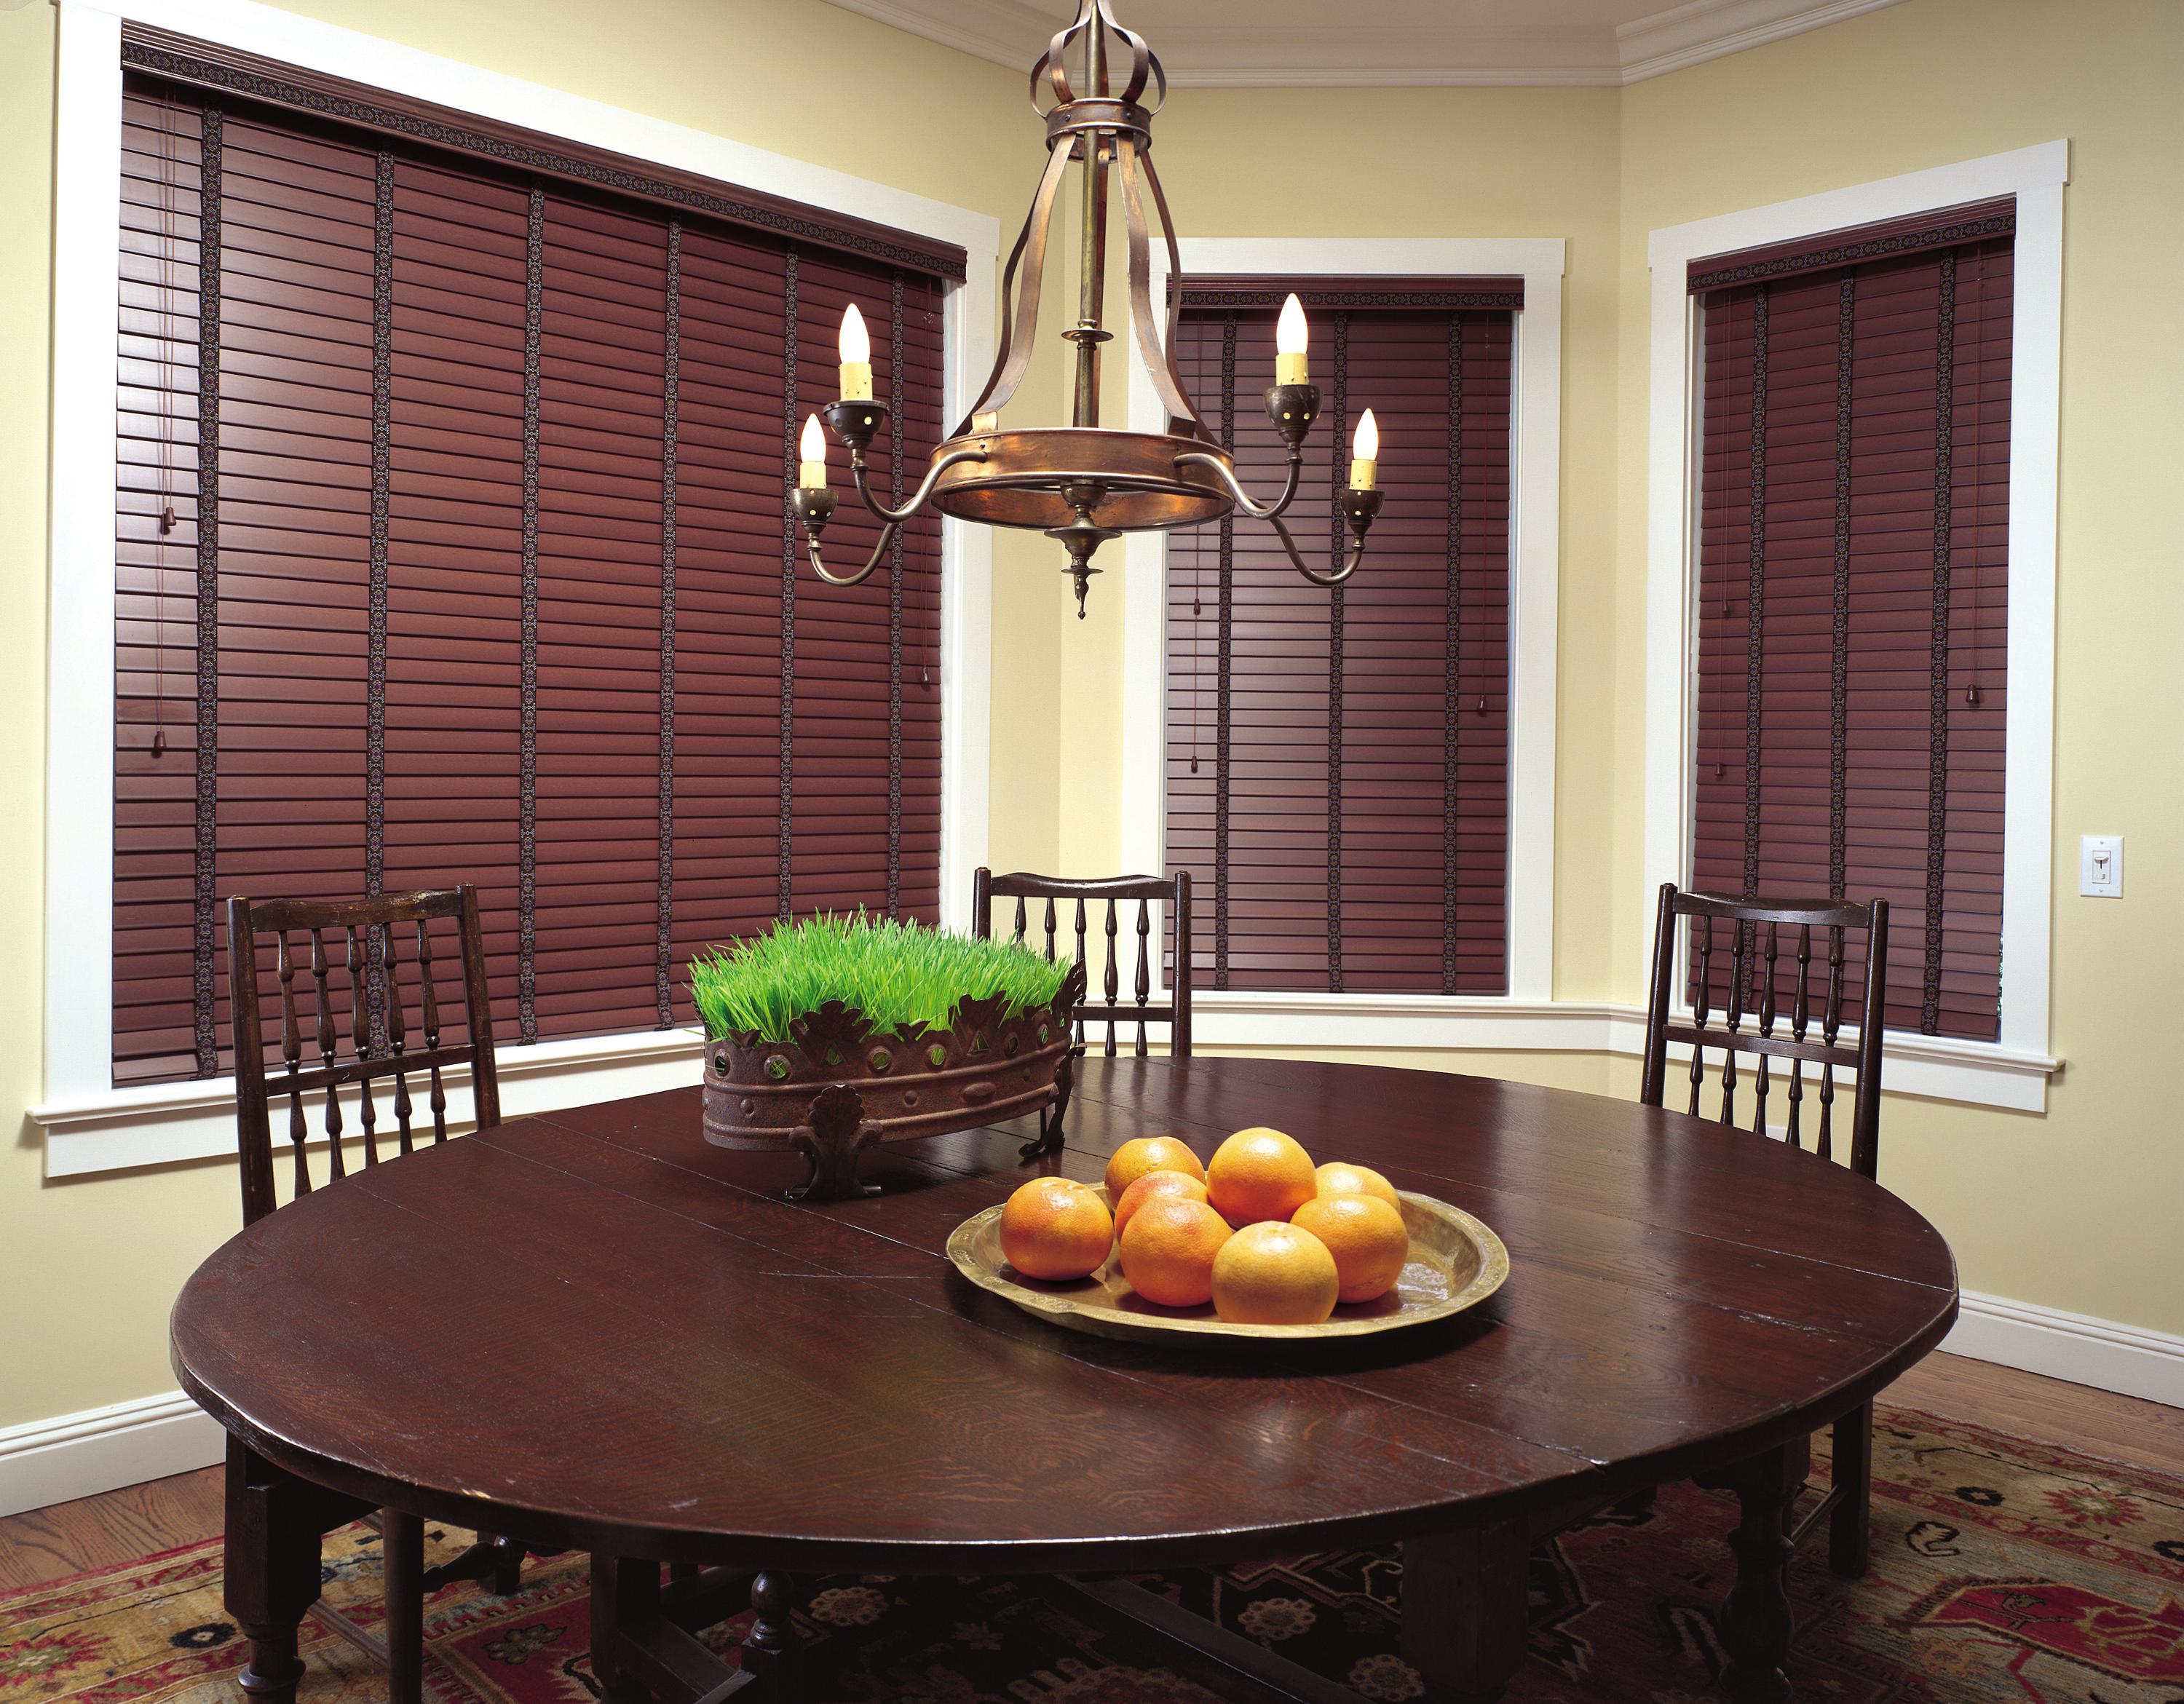 Wood Blinds Budget Blinds of Vernon Vernon (250)275-2735